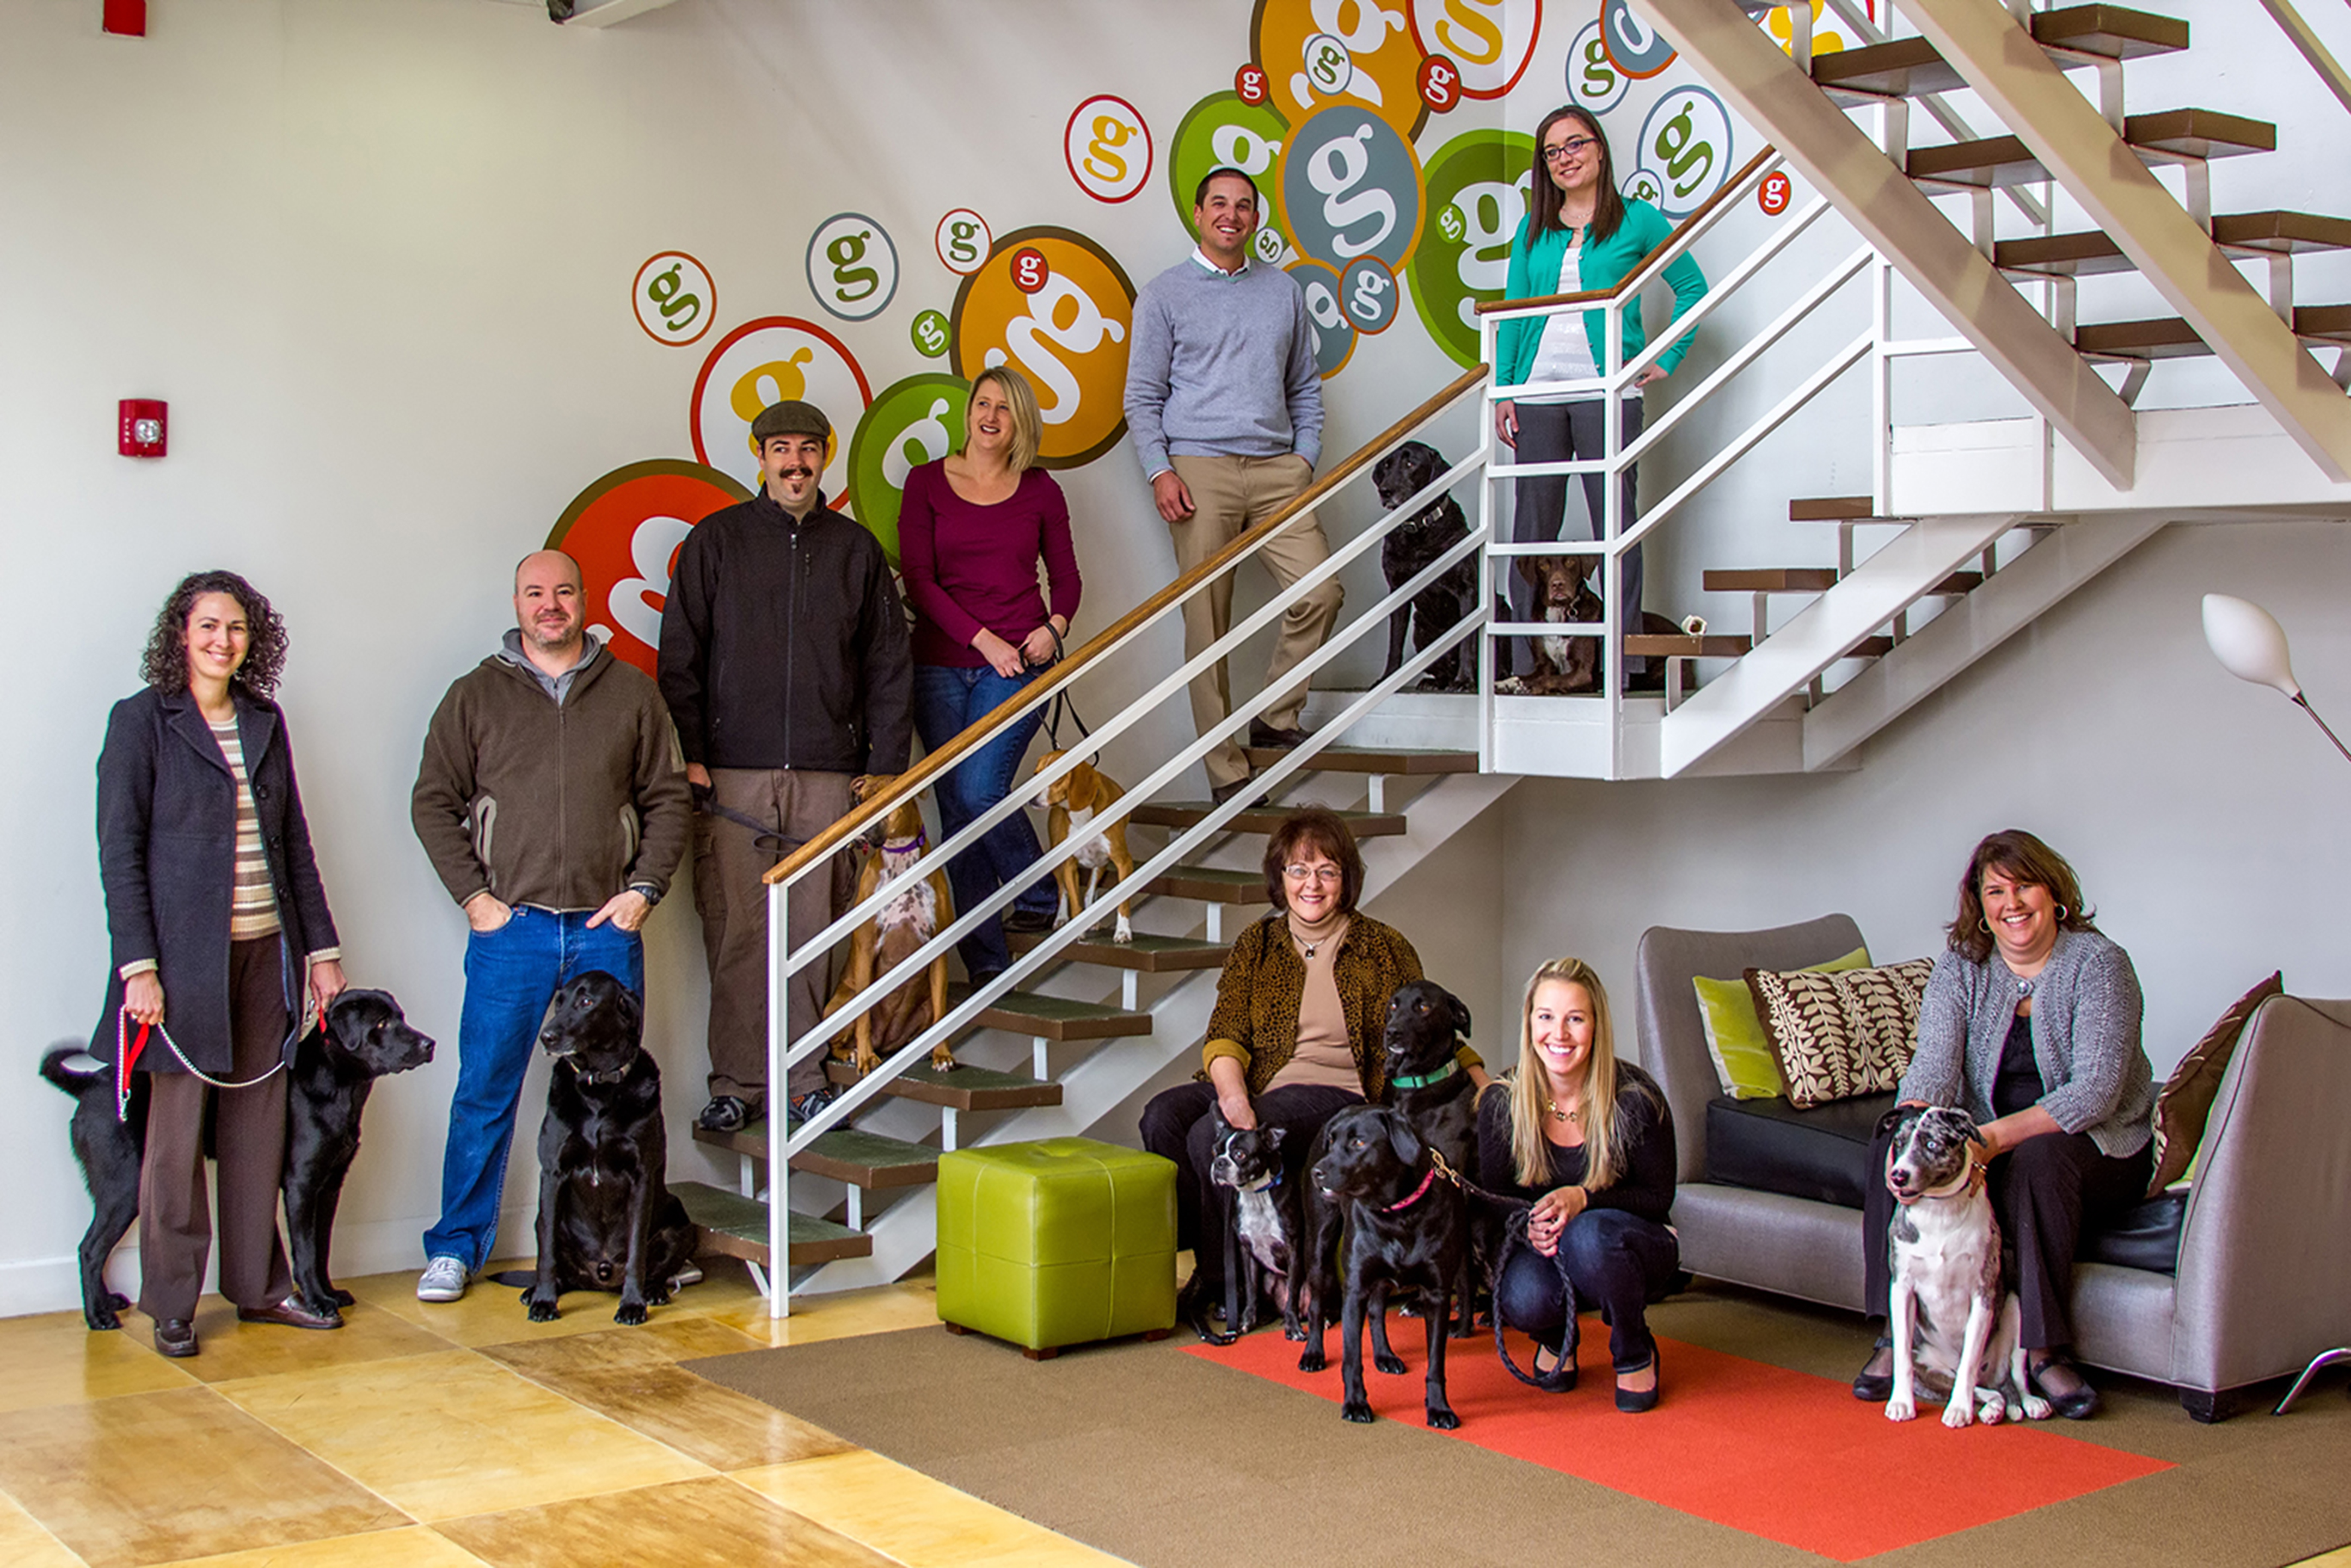 Previous Take Your Dog To Work Day participants, from The Glenn Group, Reno, NV